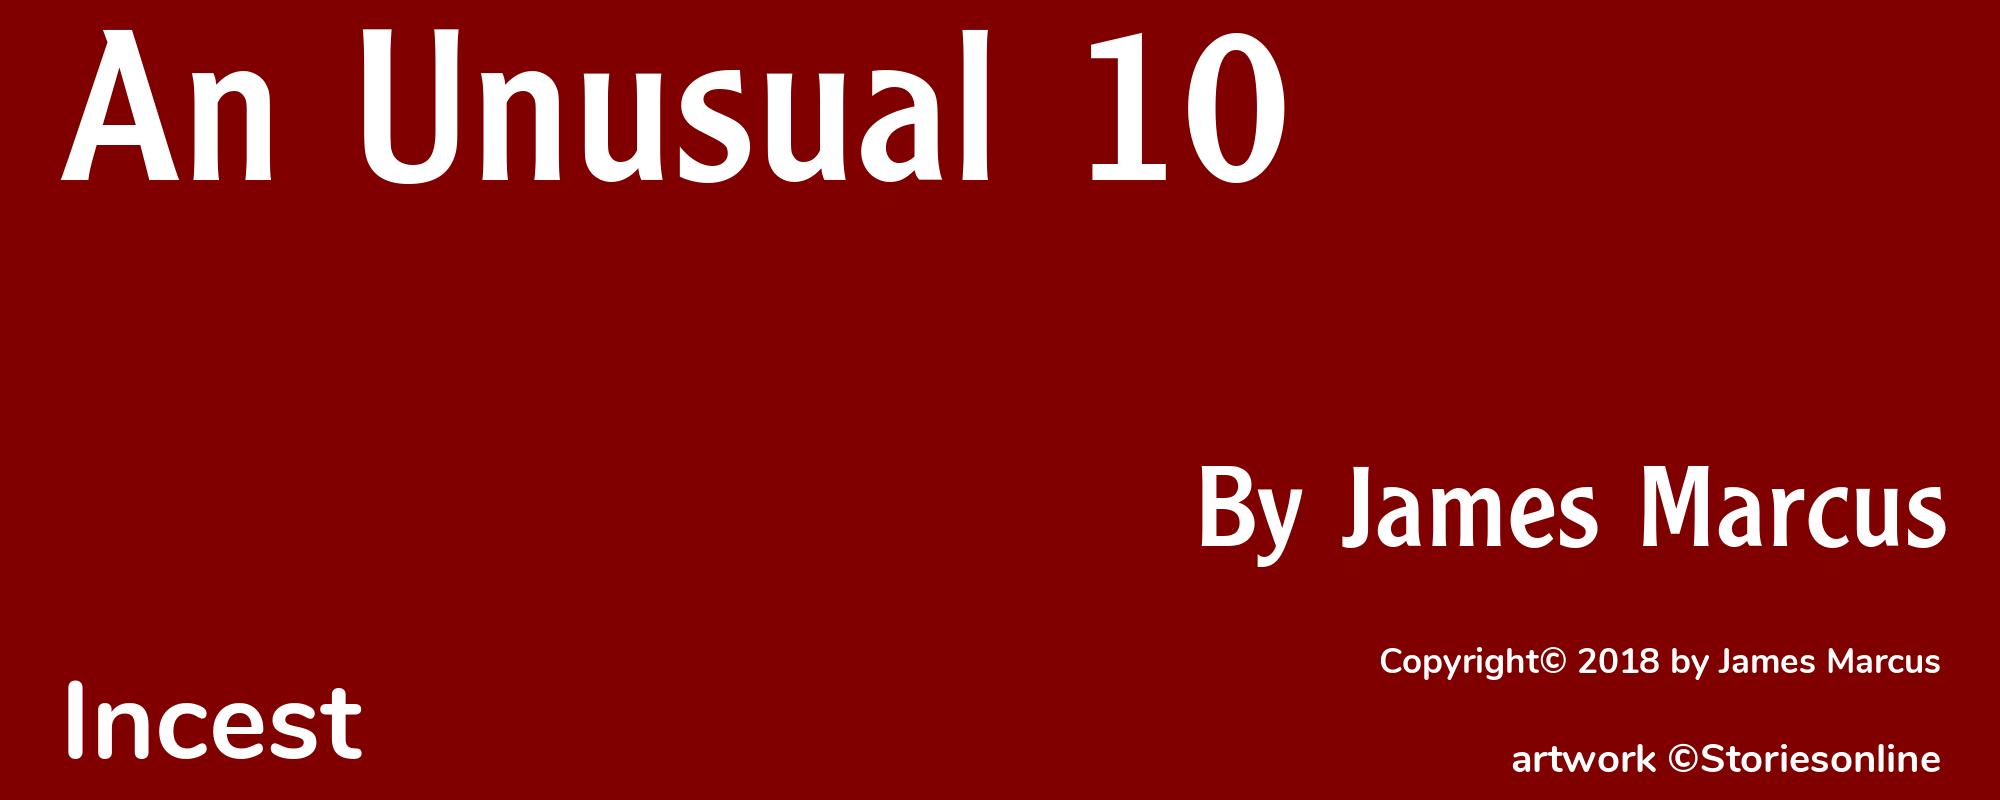 An Unusual 10 - Cover